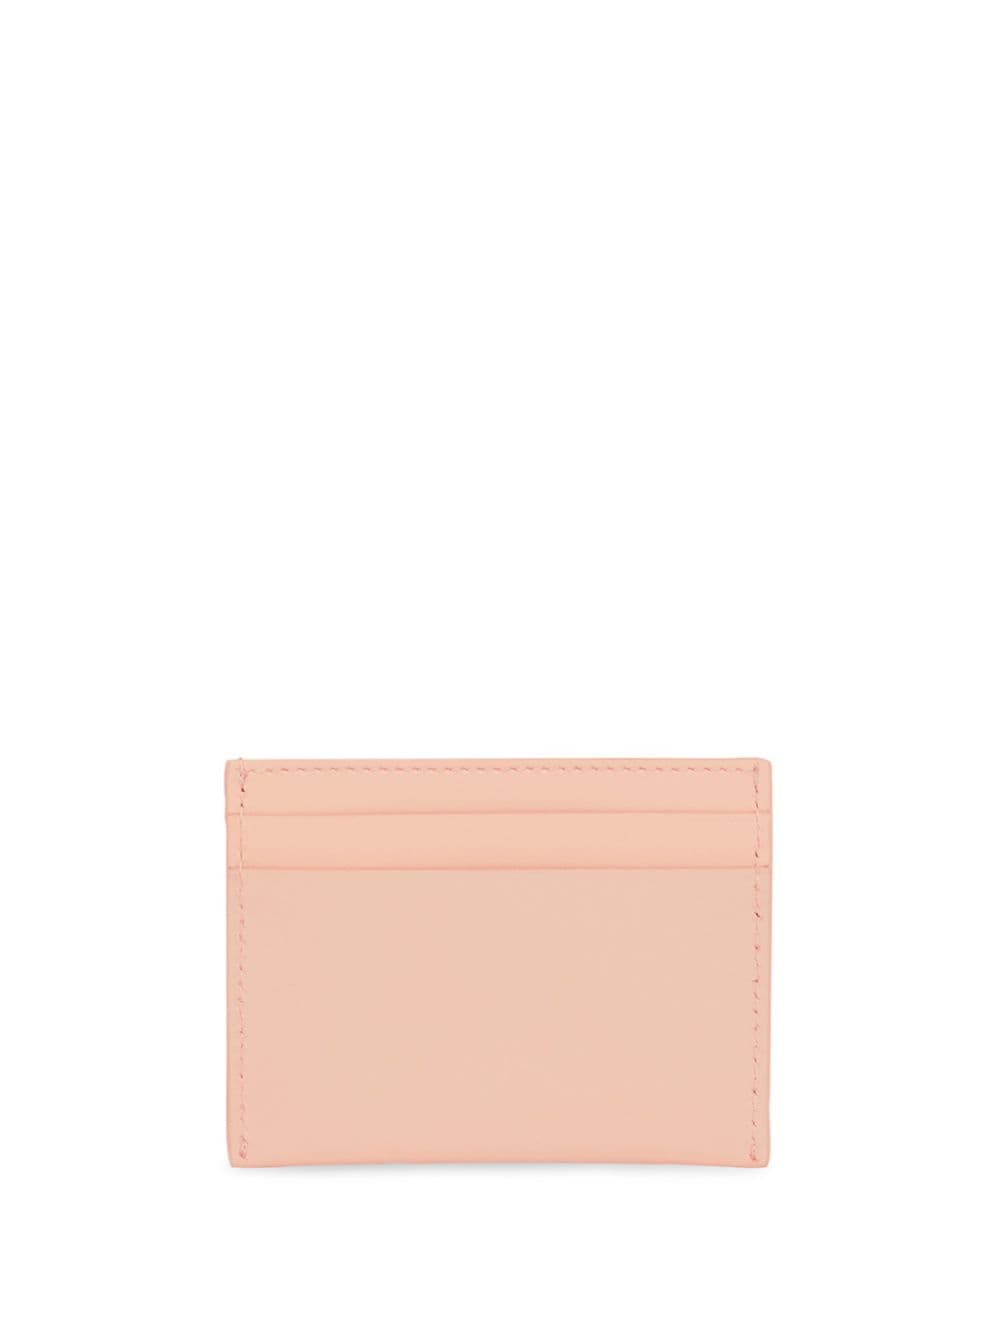 Burberry Horseferry Print Leather Card Case - Farfetch